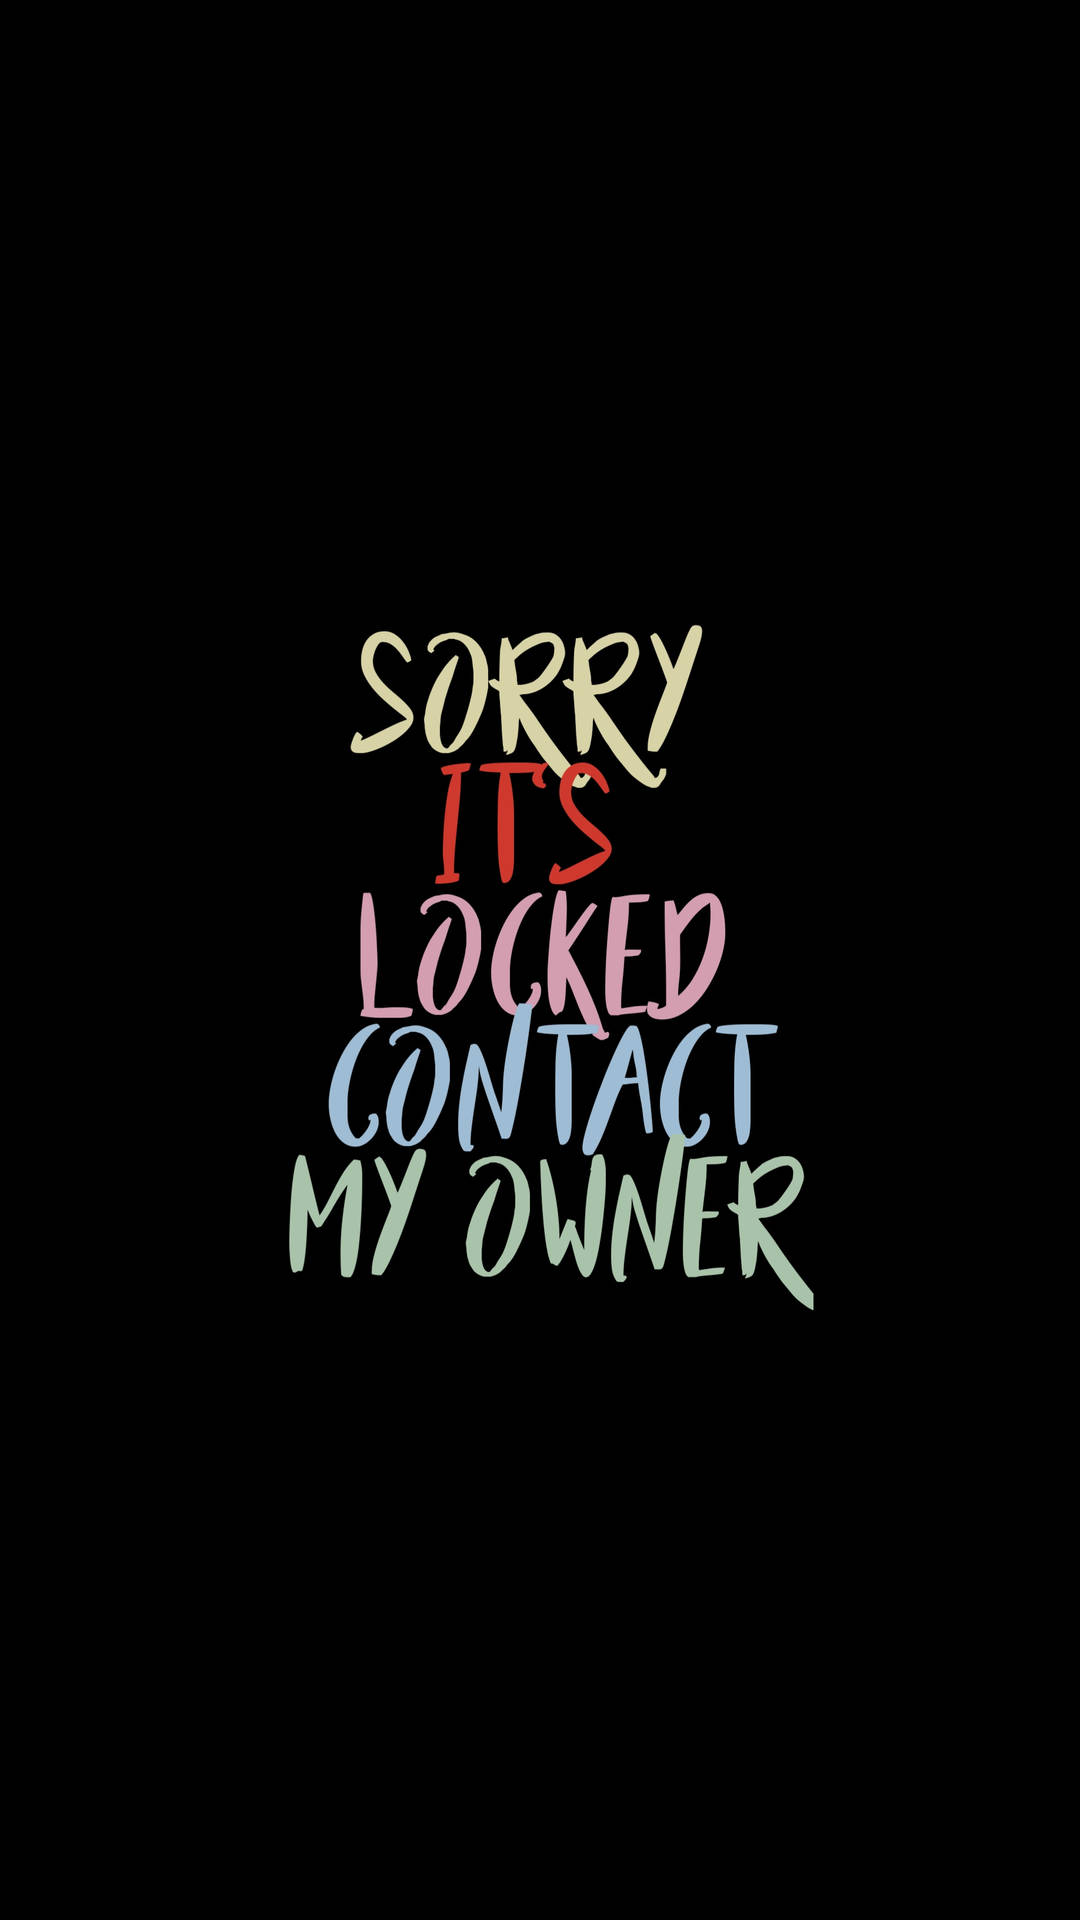 It’s Locked For A Reason Contact The Owner Wallpaper